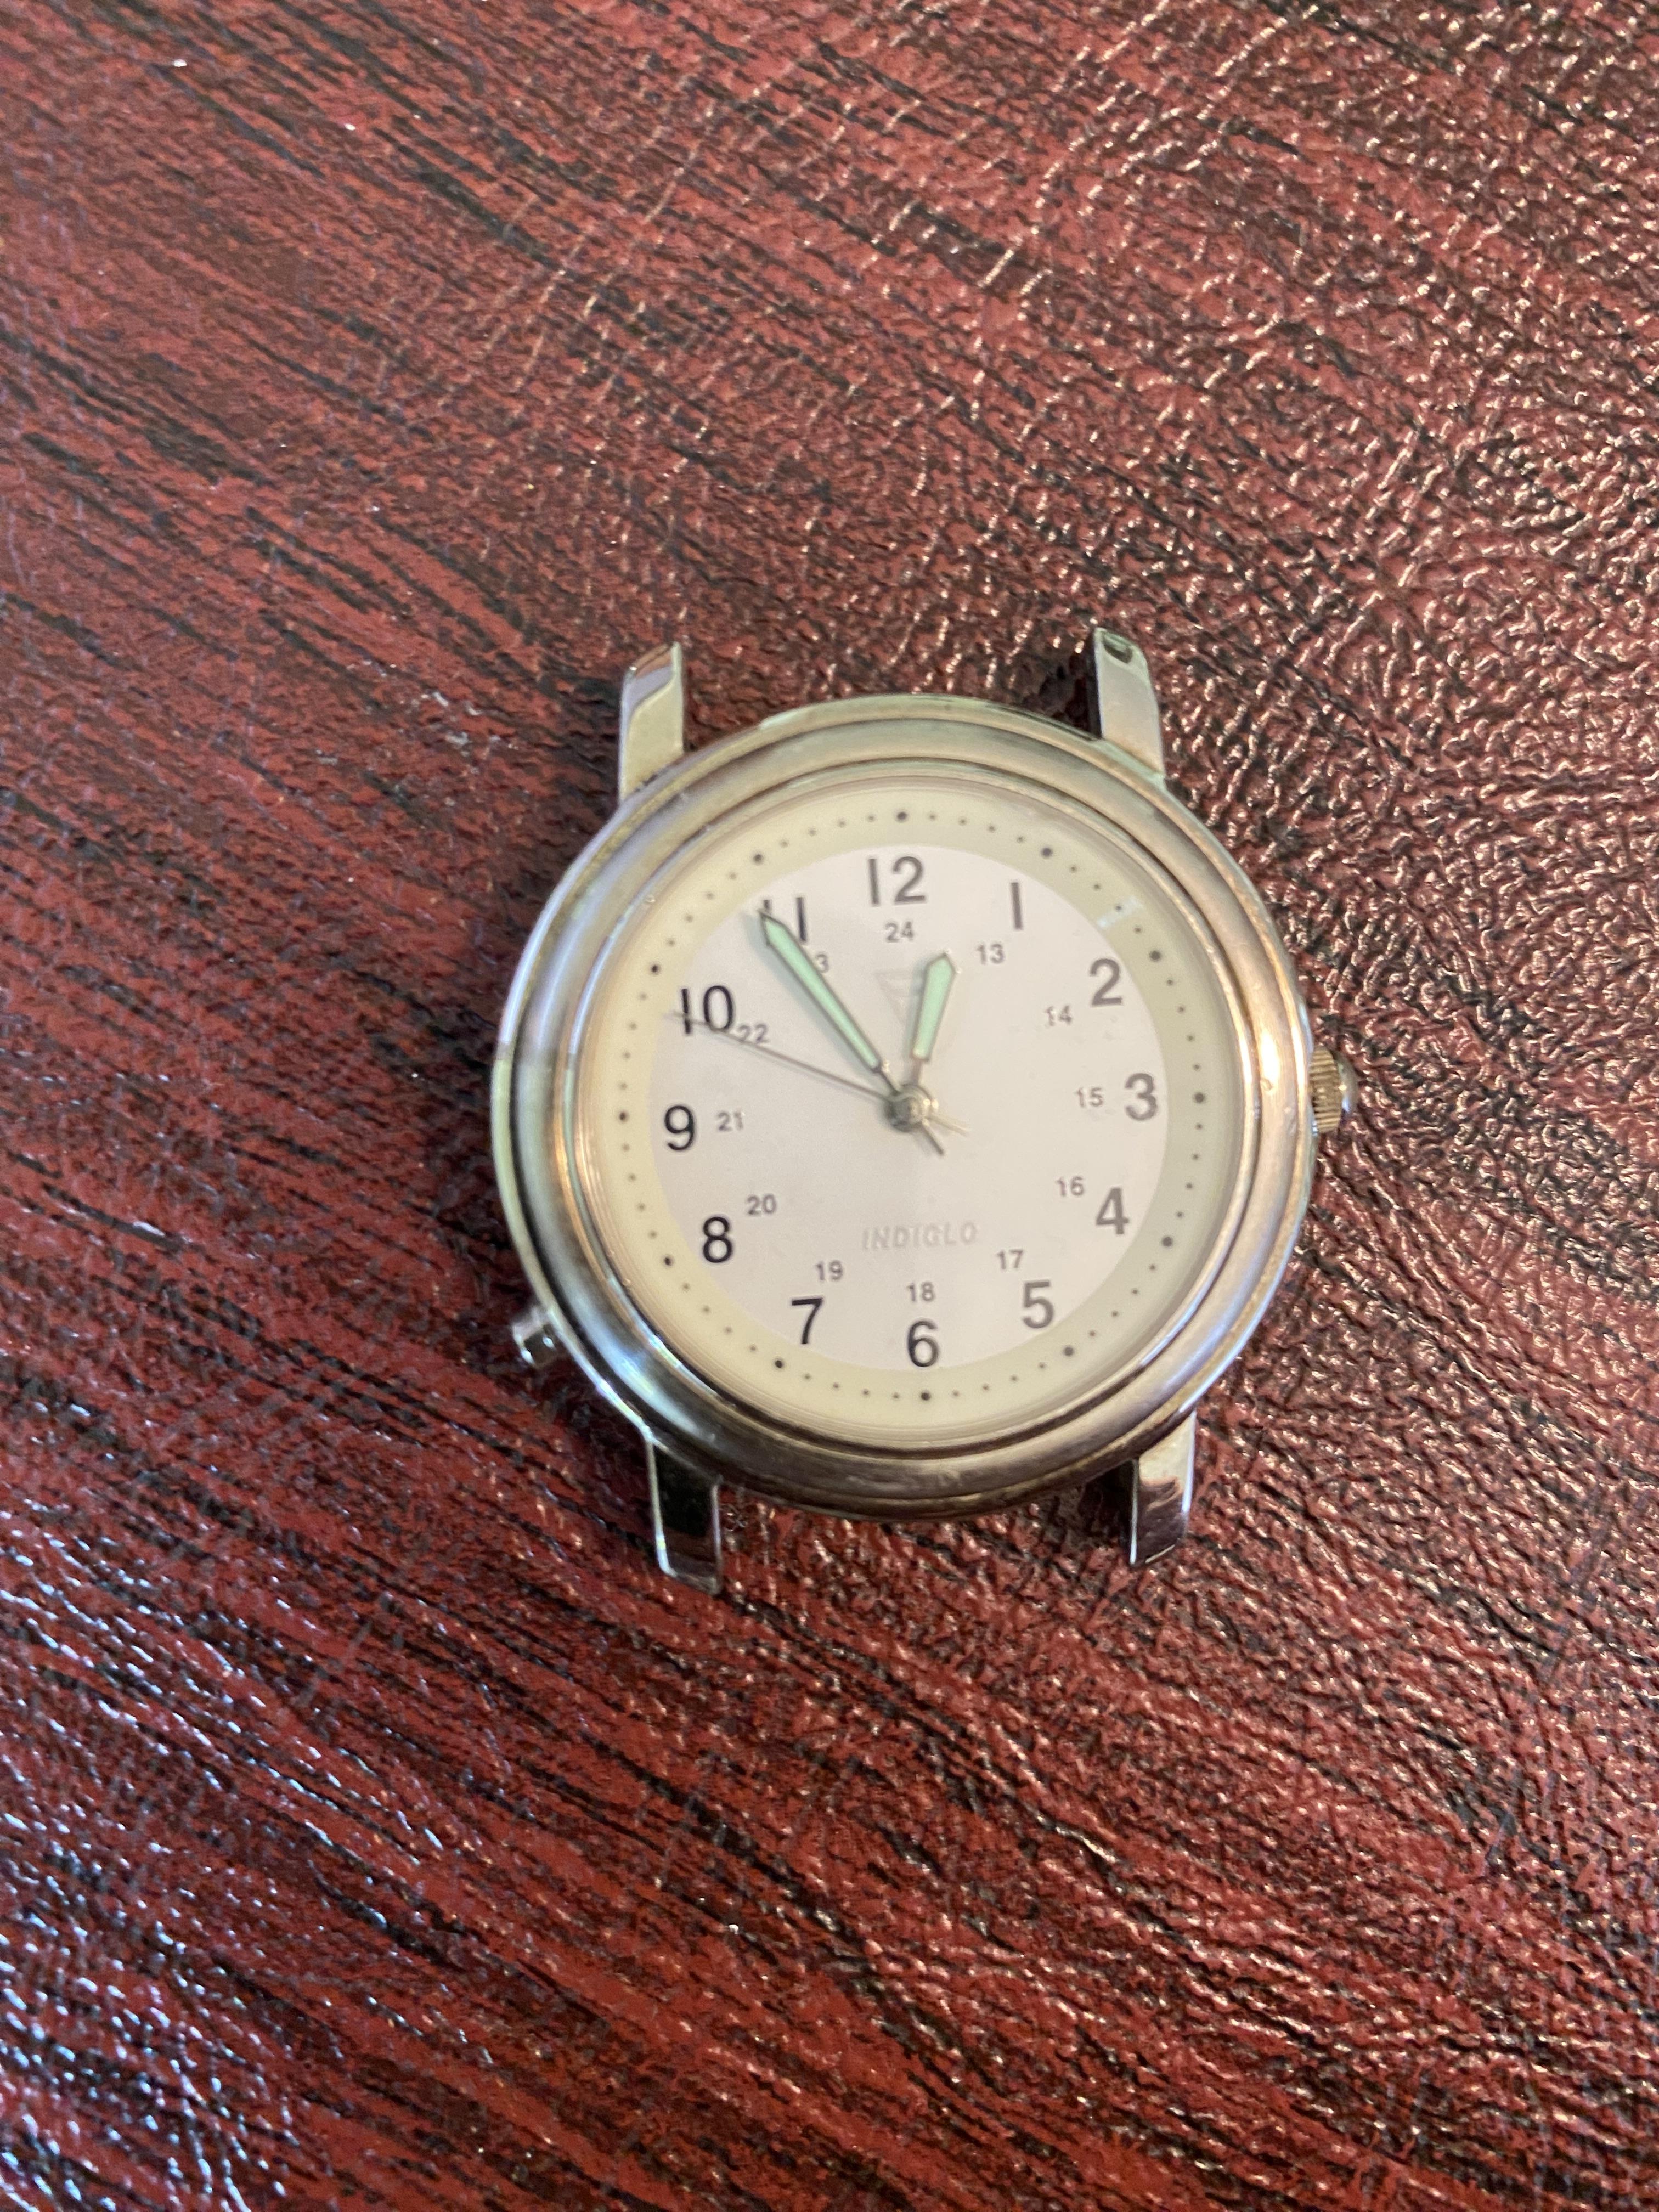 Timex 376 MA CELL B4 broken stem - New to watch repair ** Safe Zone For ...